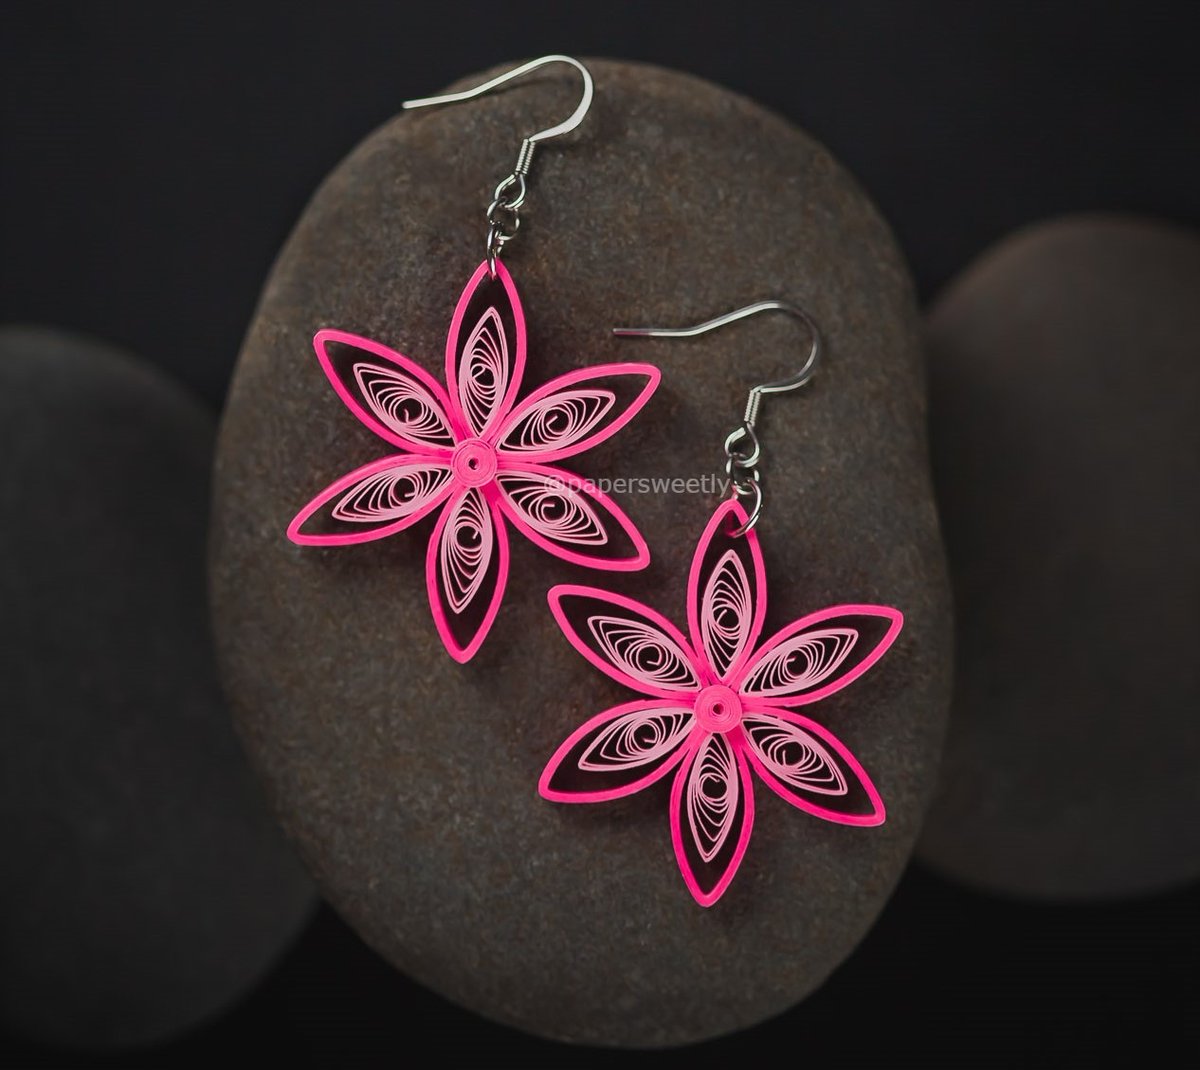 Pretty Pink Flower Earrings!!
.
.
.
#papersweetly #papersweetlyearrings #paperearrings #quillingearrings #paperquilling #paperquillingearrings #paperjewelry #lightweightjewelry #sustainablefashion #recycledjewelry #pinkflowers #flowerearrings #paperflowers #pink #pinklove